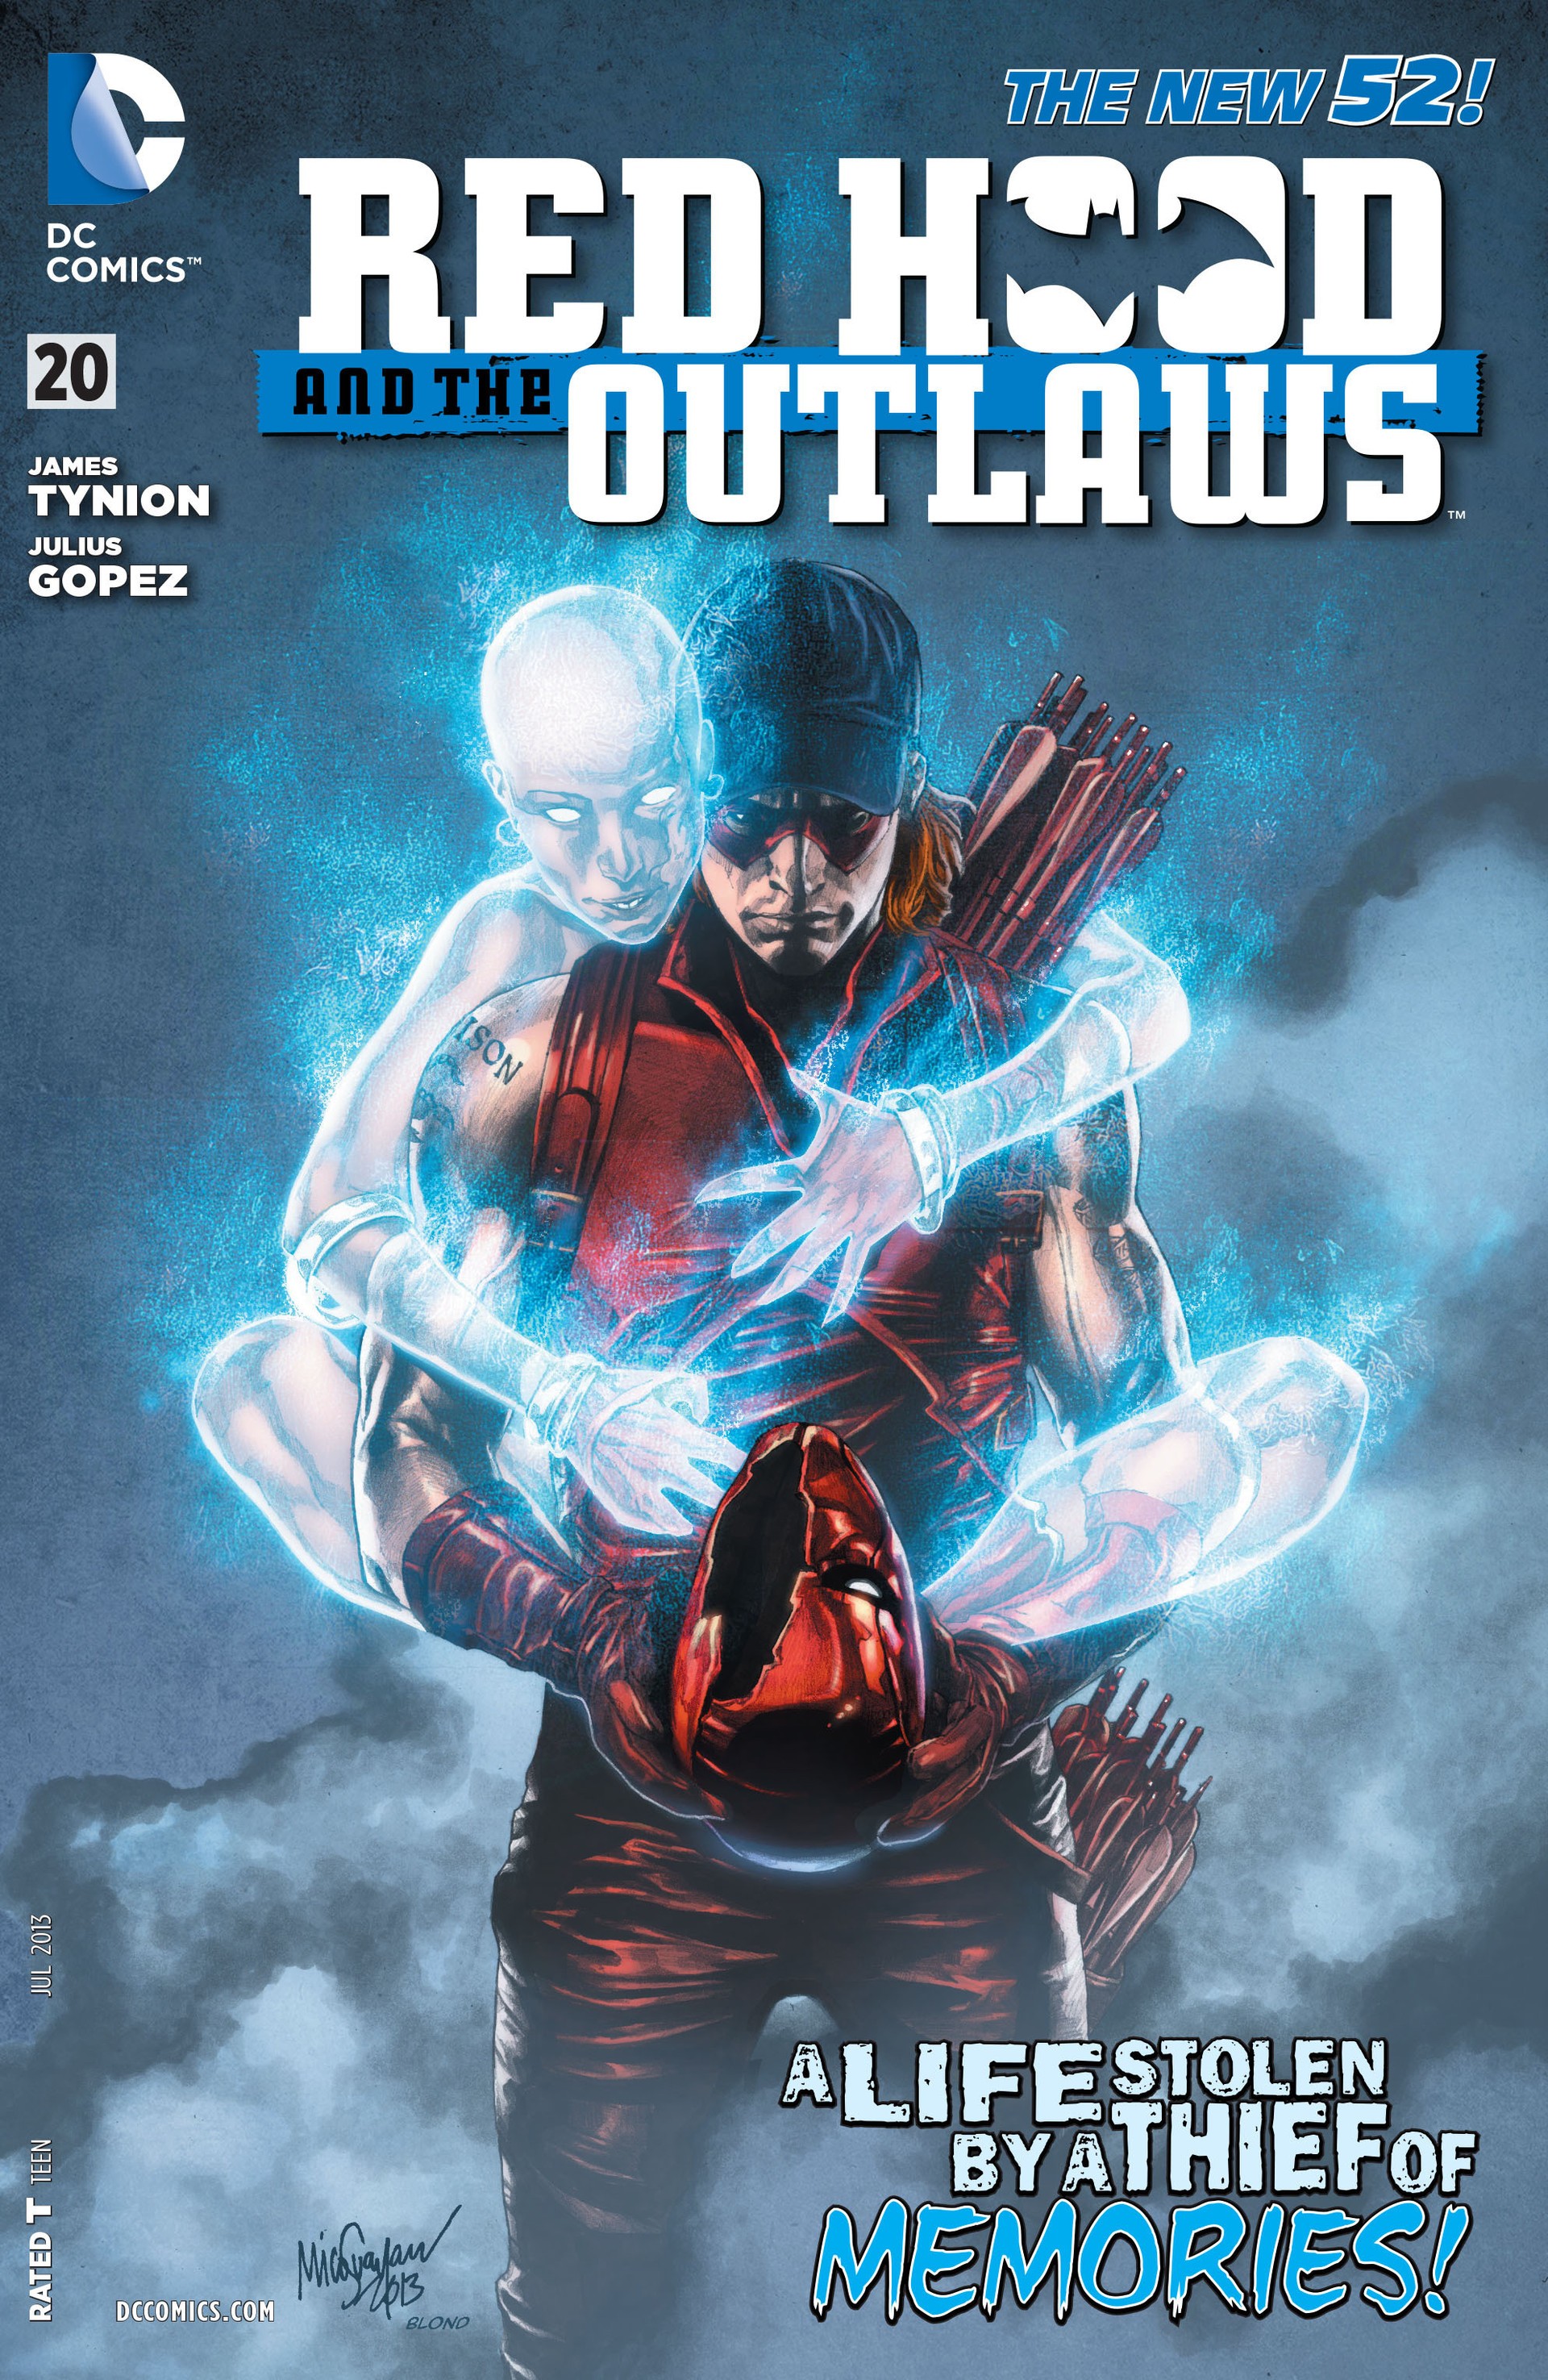 Red Hood and the Outlaws Vol. 1 #20